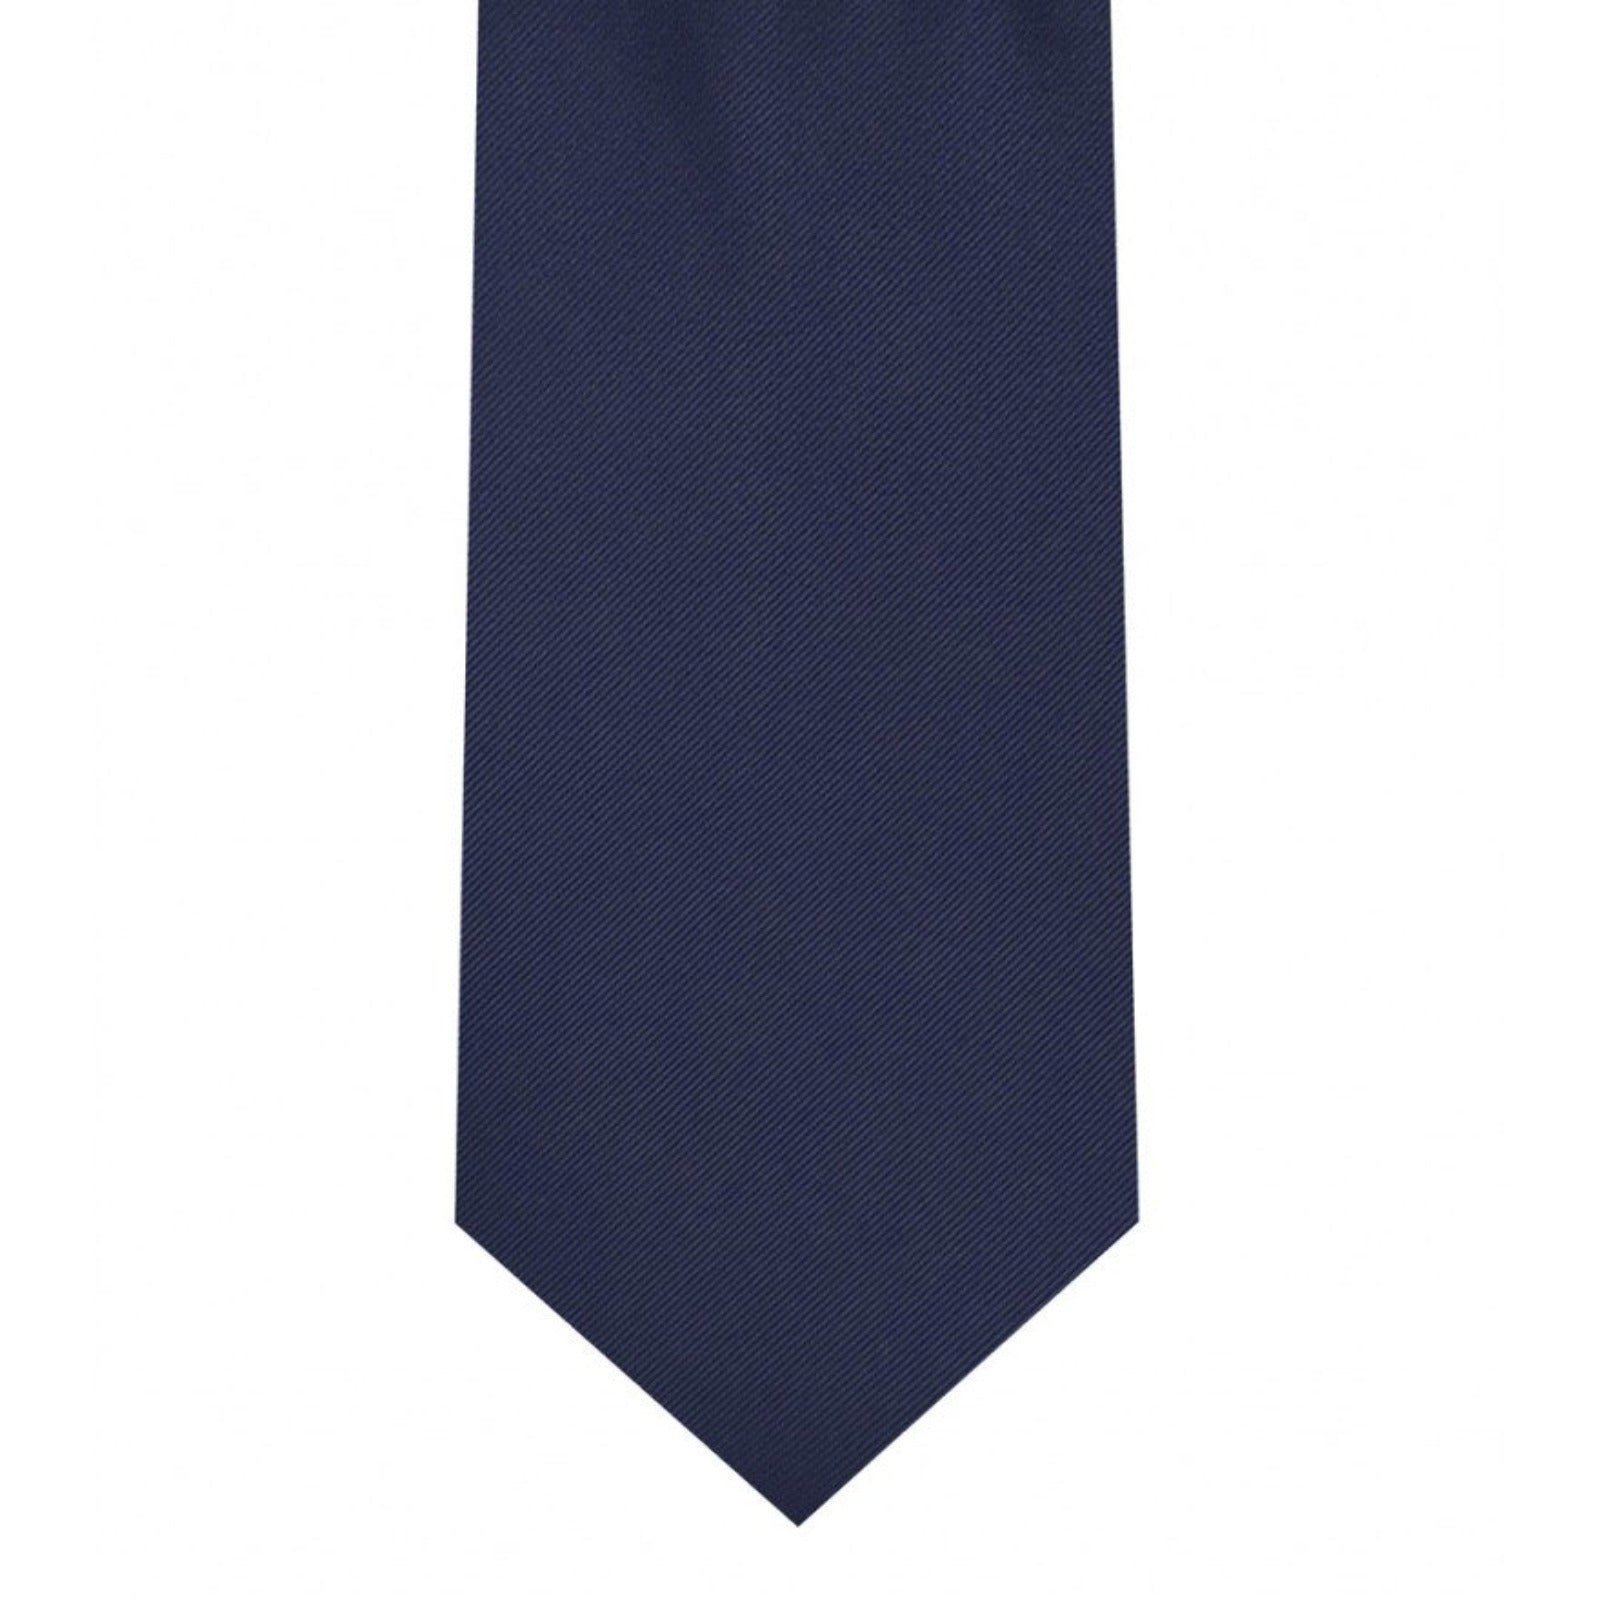 Classic Navy Blue Tie Skinny width 2.75 inches With Matching Pocket Square | KCT Menswear 